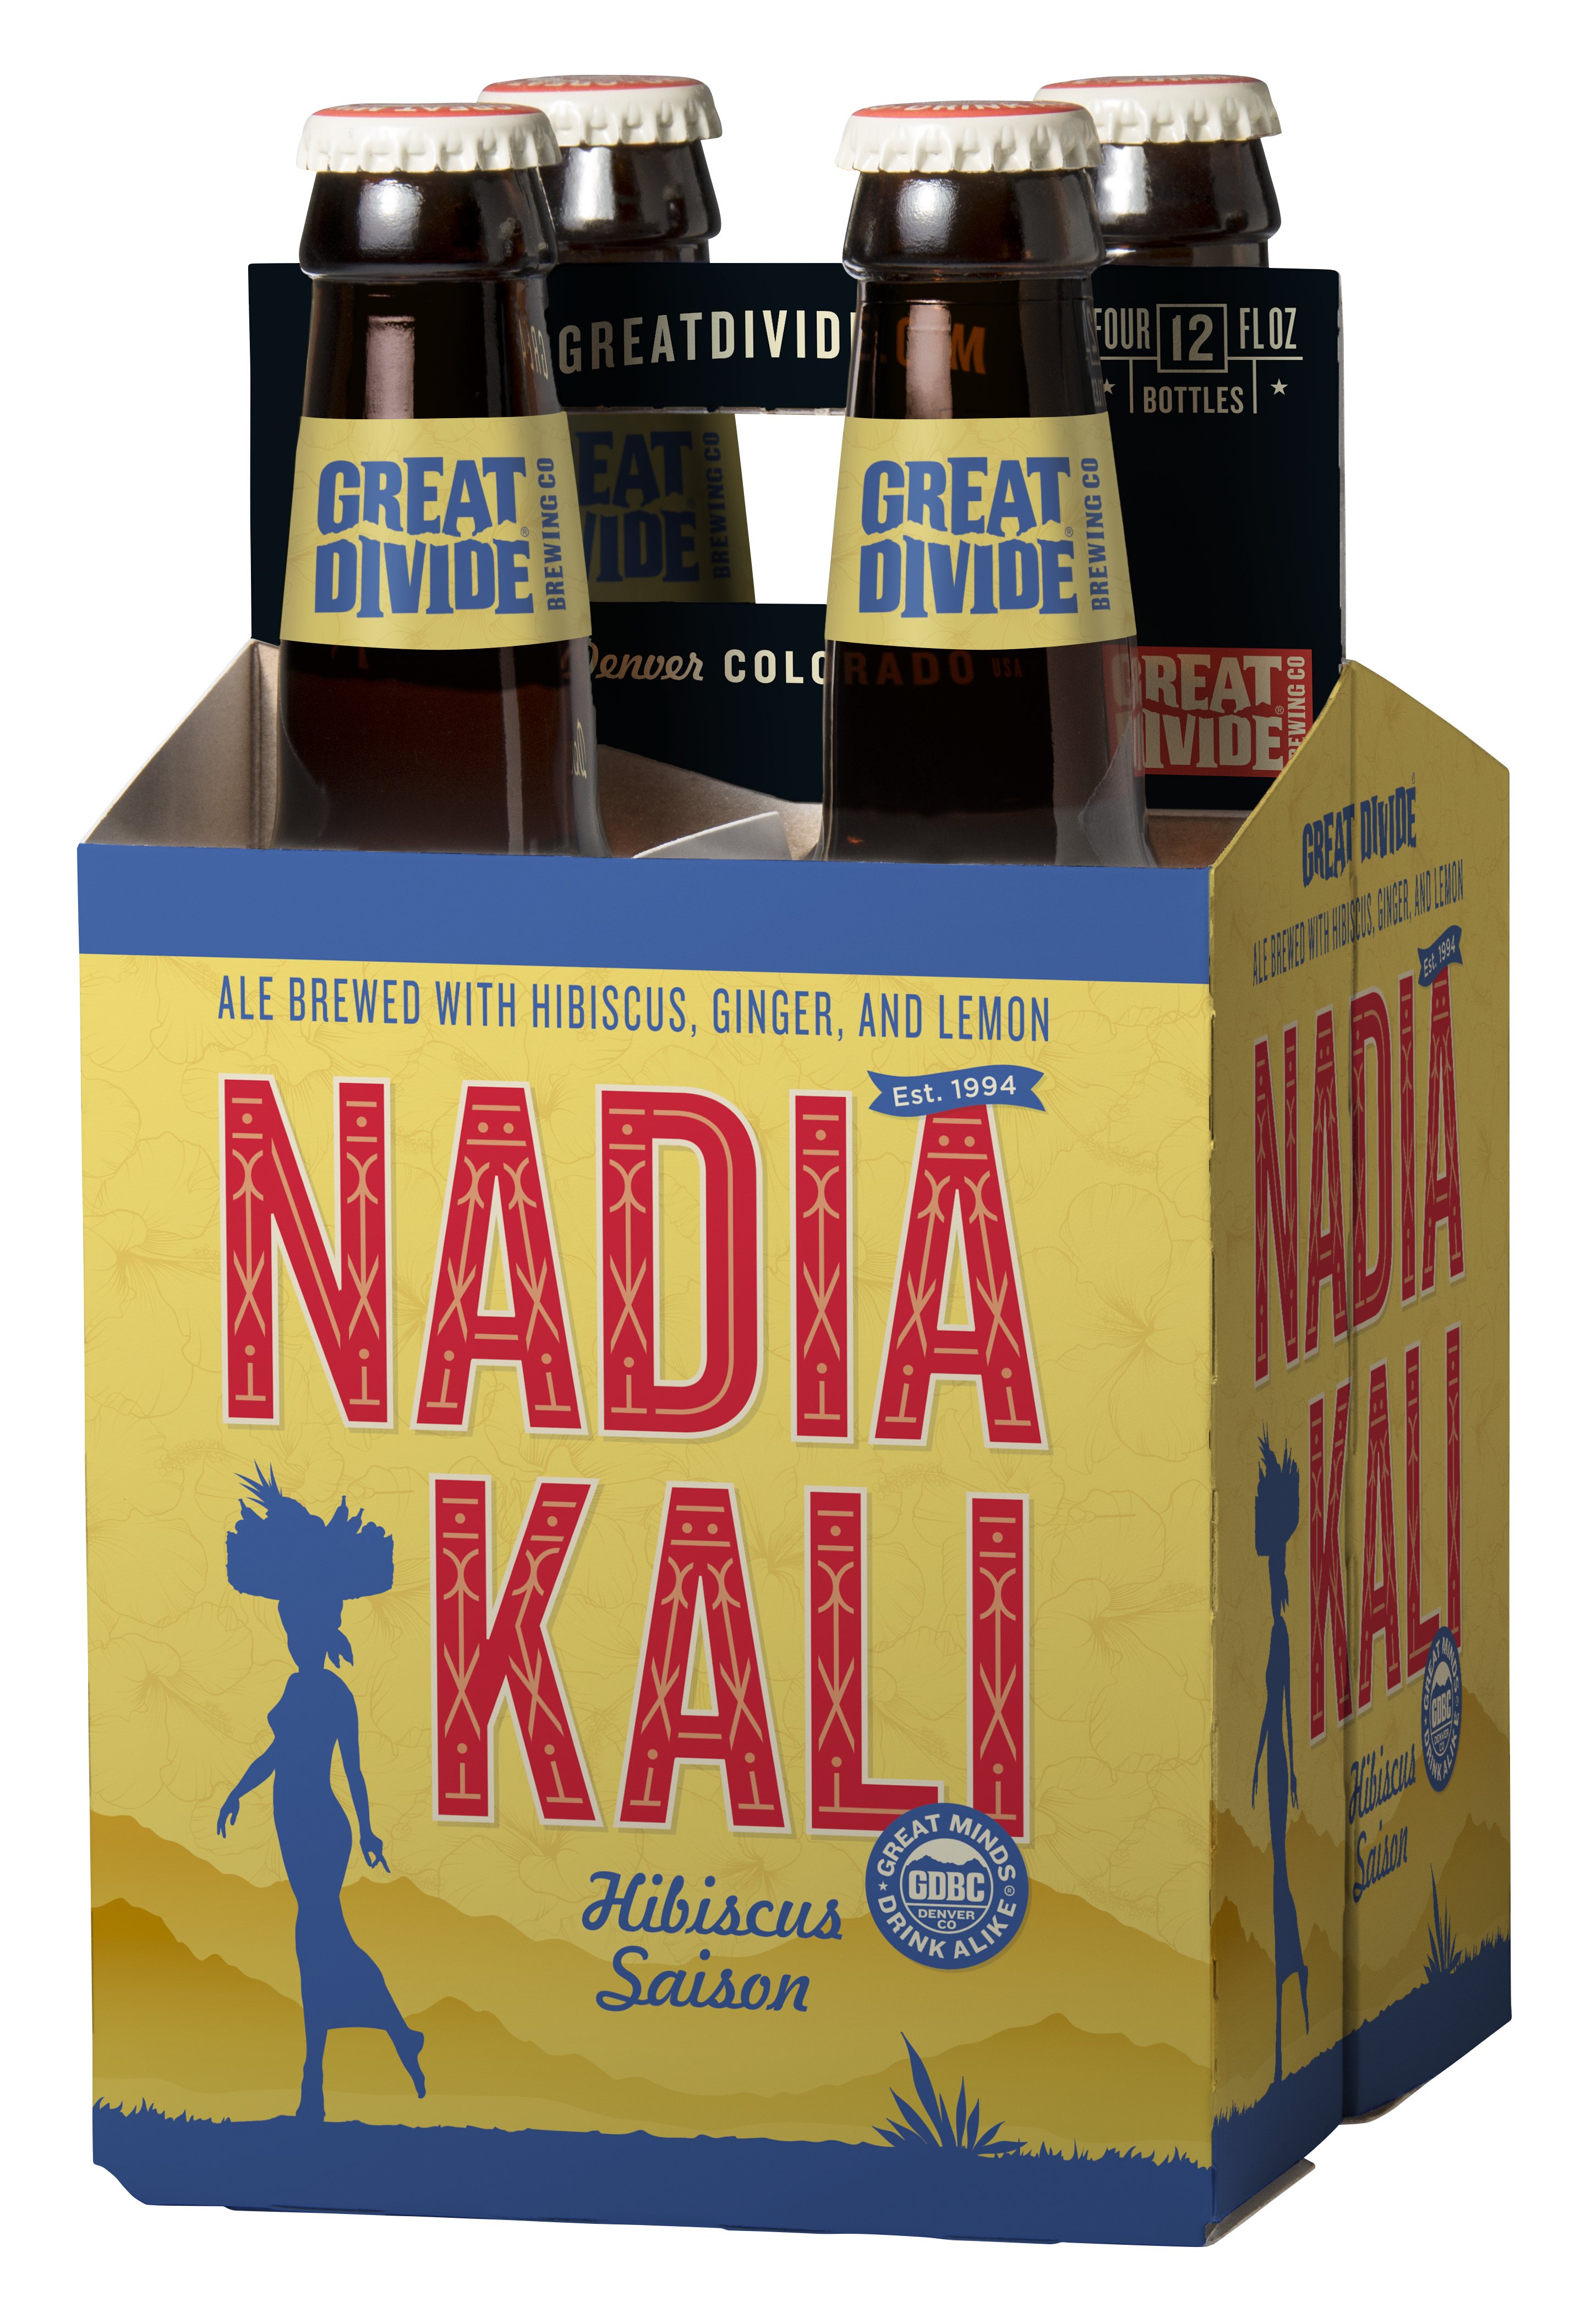 Great Divide Nadia Kali Hibiscus Saison 4 Pack. (image courtesy of Great Divide)